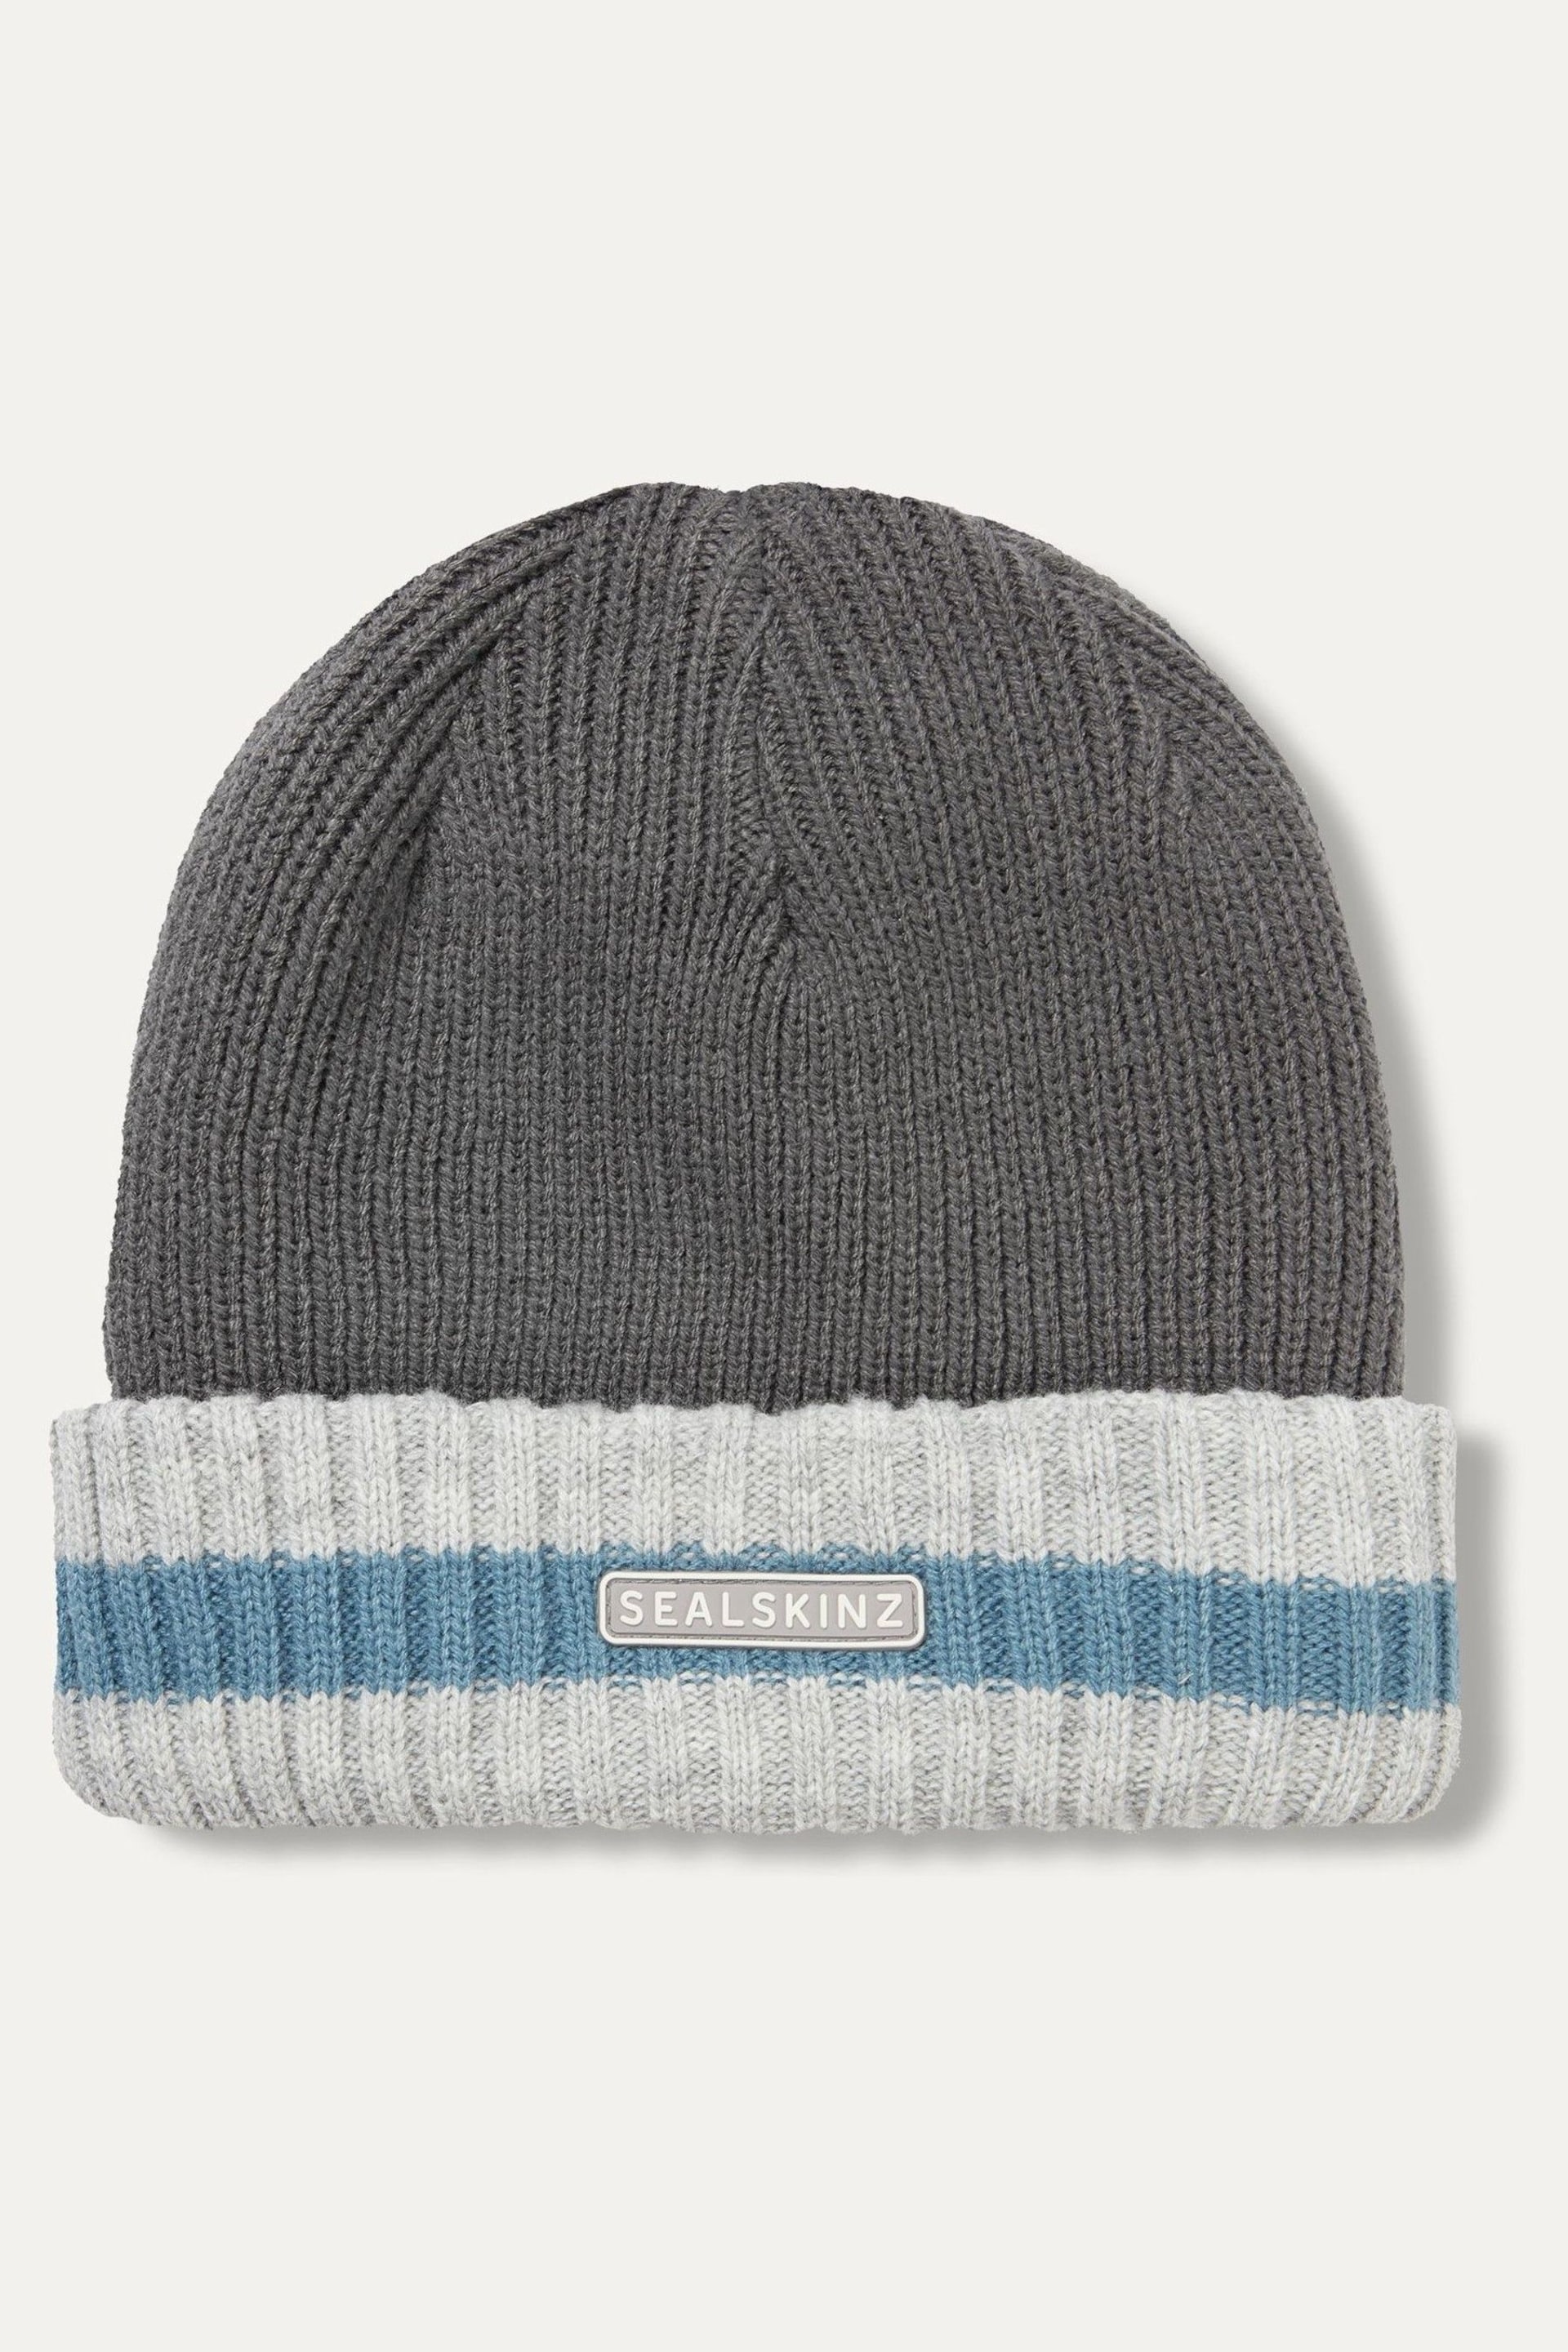 Sealskinz Holkham Waterproof Cold Weather Striped Roll Cuff Beanie - Image 1 of 2